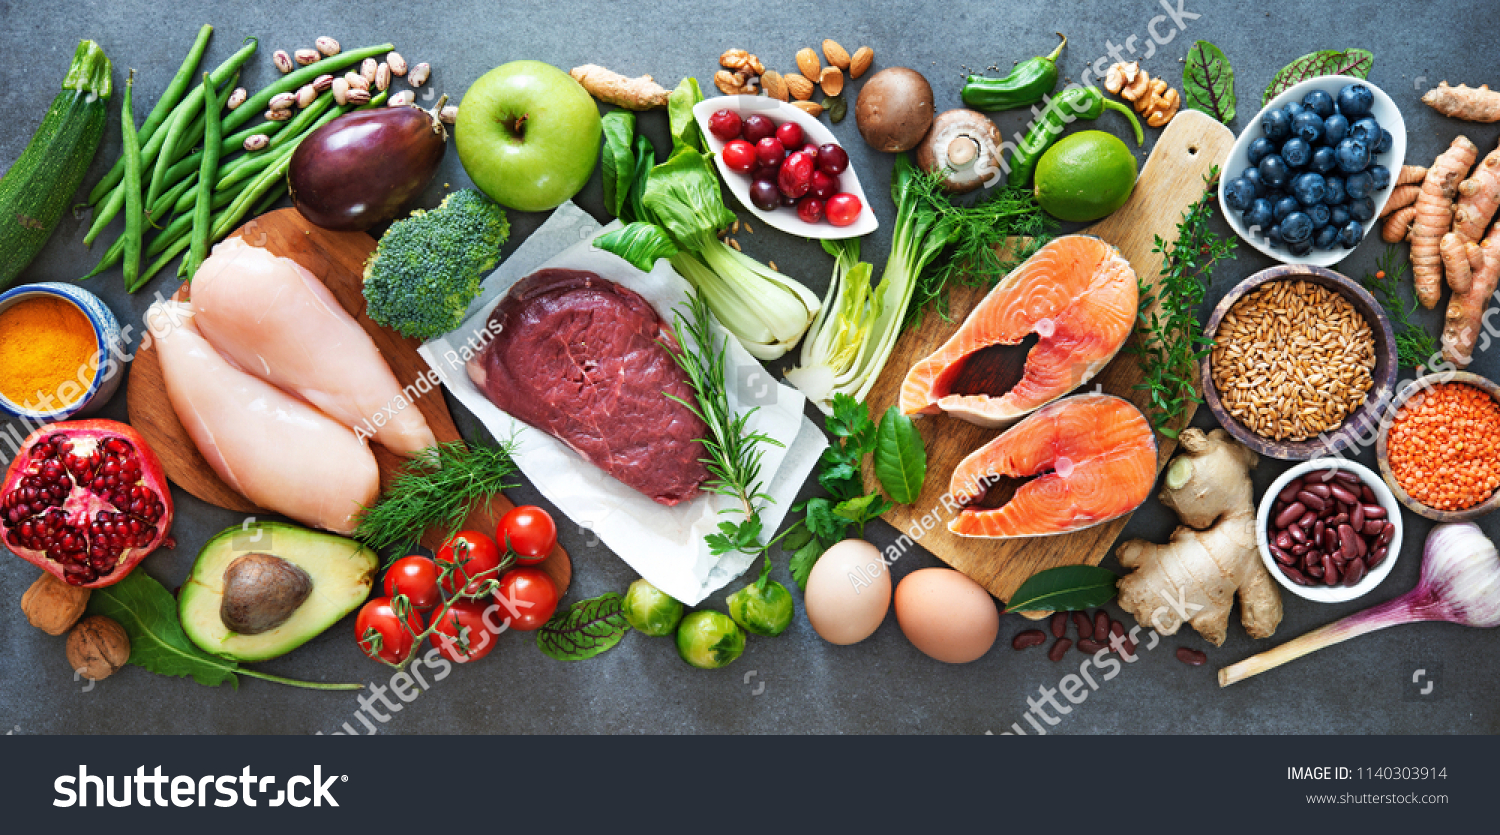 Balanced diet food background. Organic food for healthy nutrition, superfoods, meat, fish, legumes, nuts, seeds and greens  #1140303914